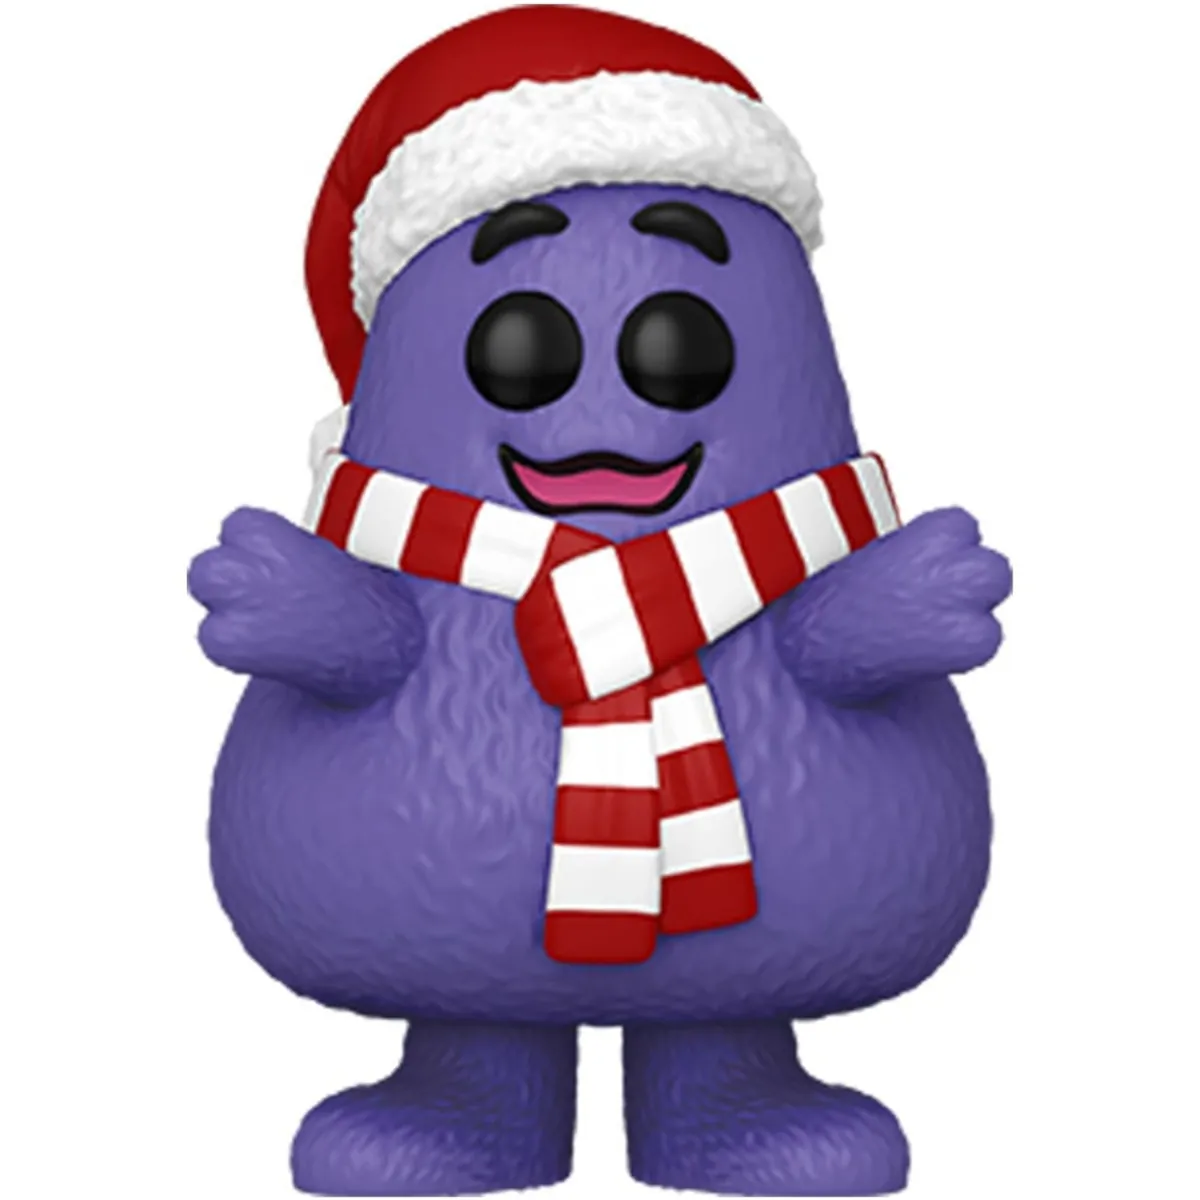 74065 Funko Pop Ad Icons McDonalds Holiday Grimace Collectable Vinyl Figure